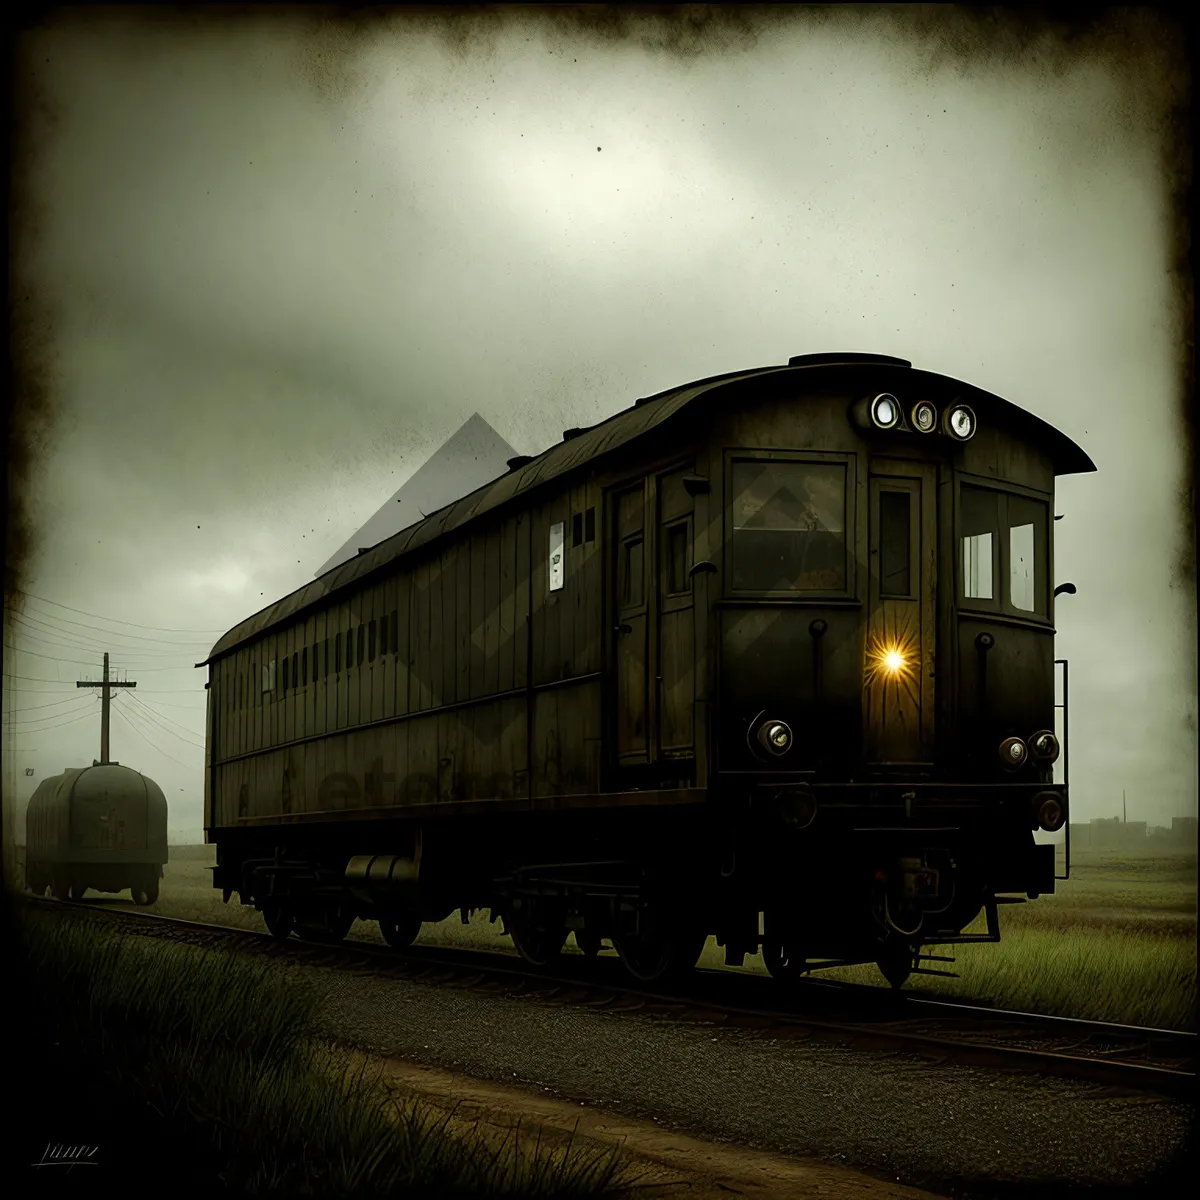 Picture of Vintage locomotive on railway track carrying cargo.